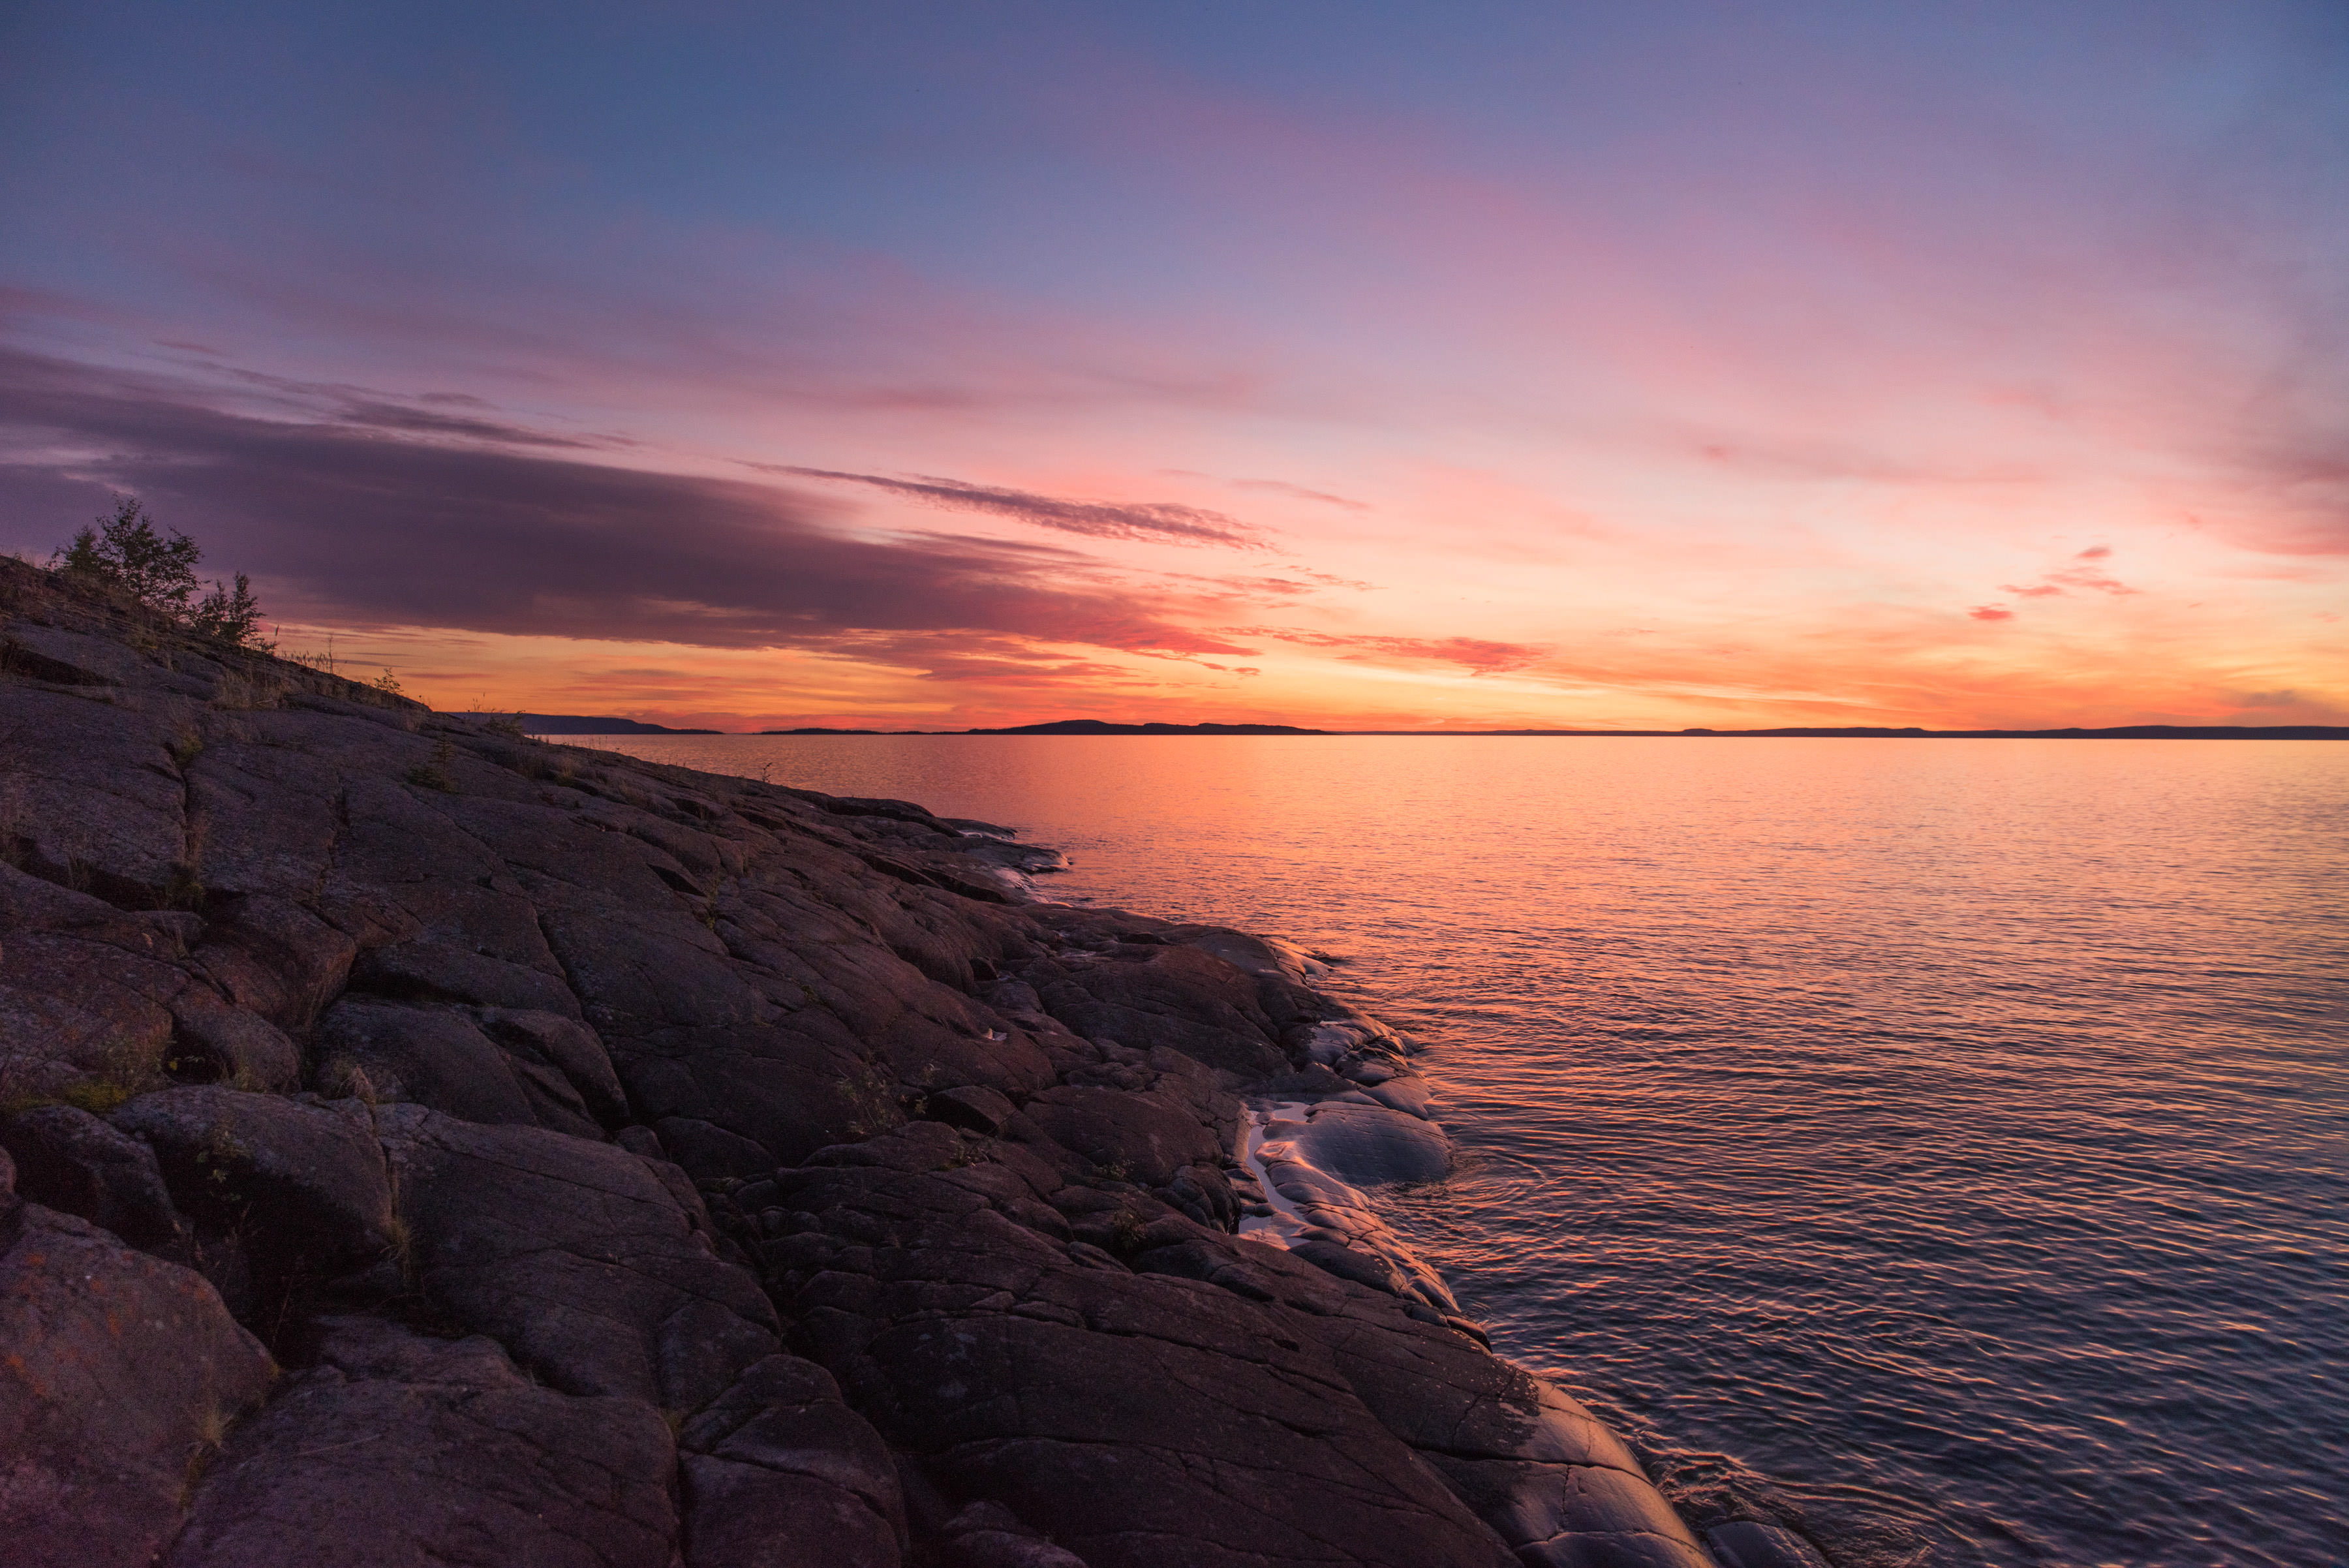 the sun sets over the rocky shoreline of great slave lake, a cold-water lake in Canada's Northwest Territories